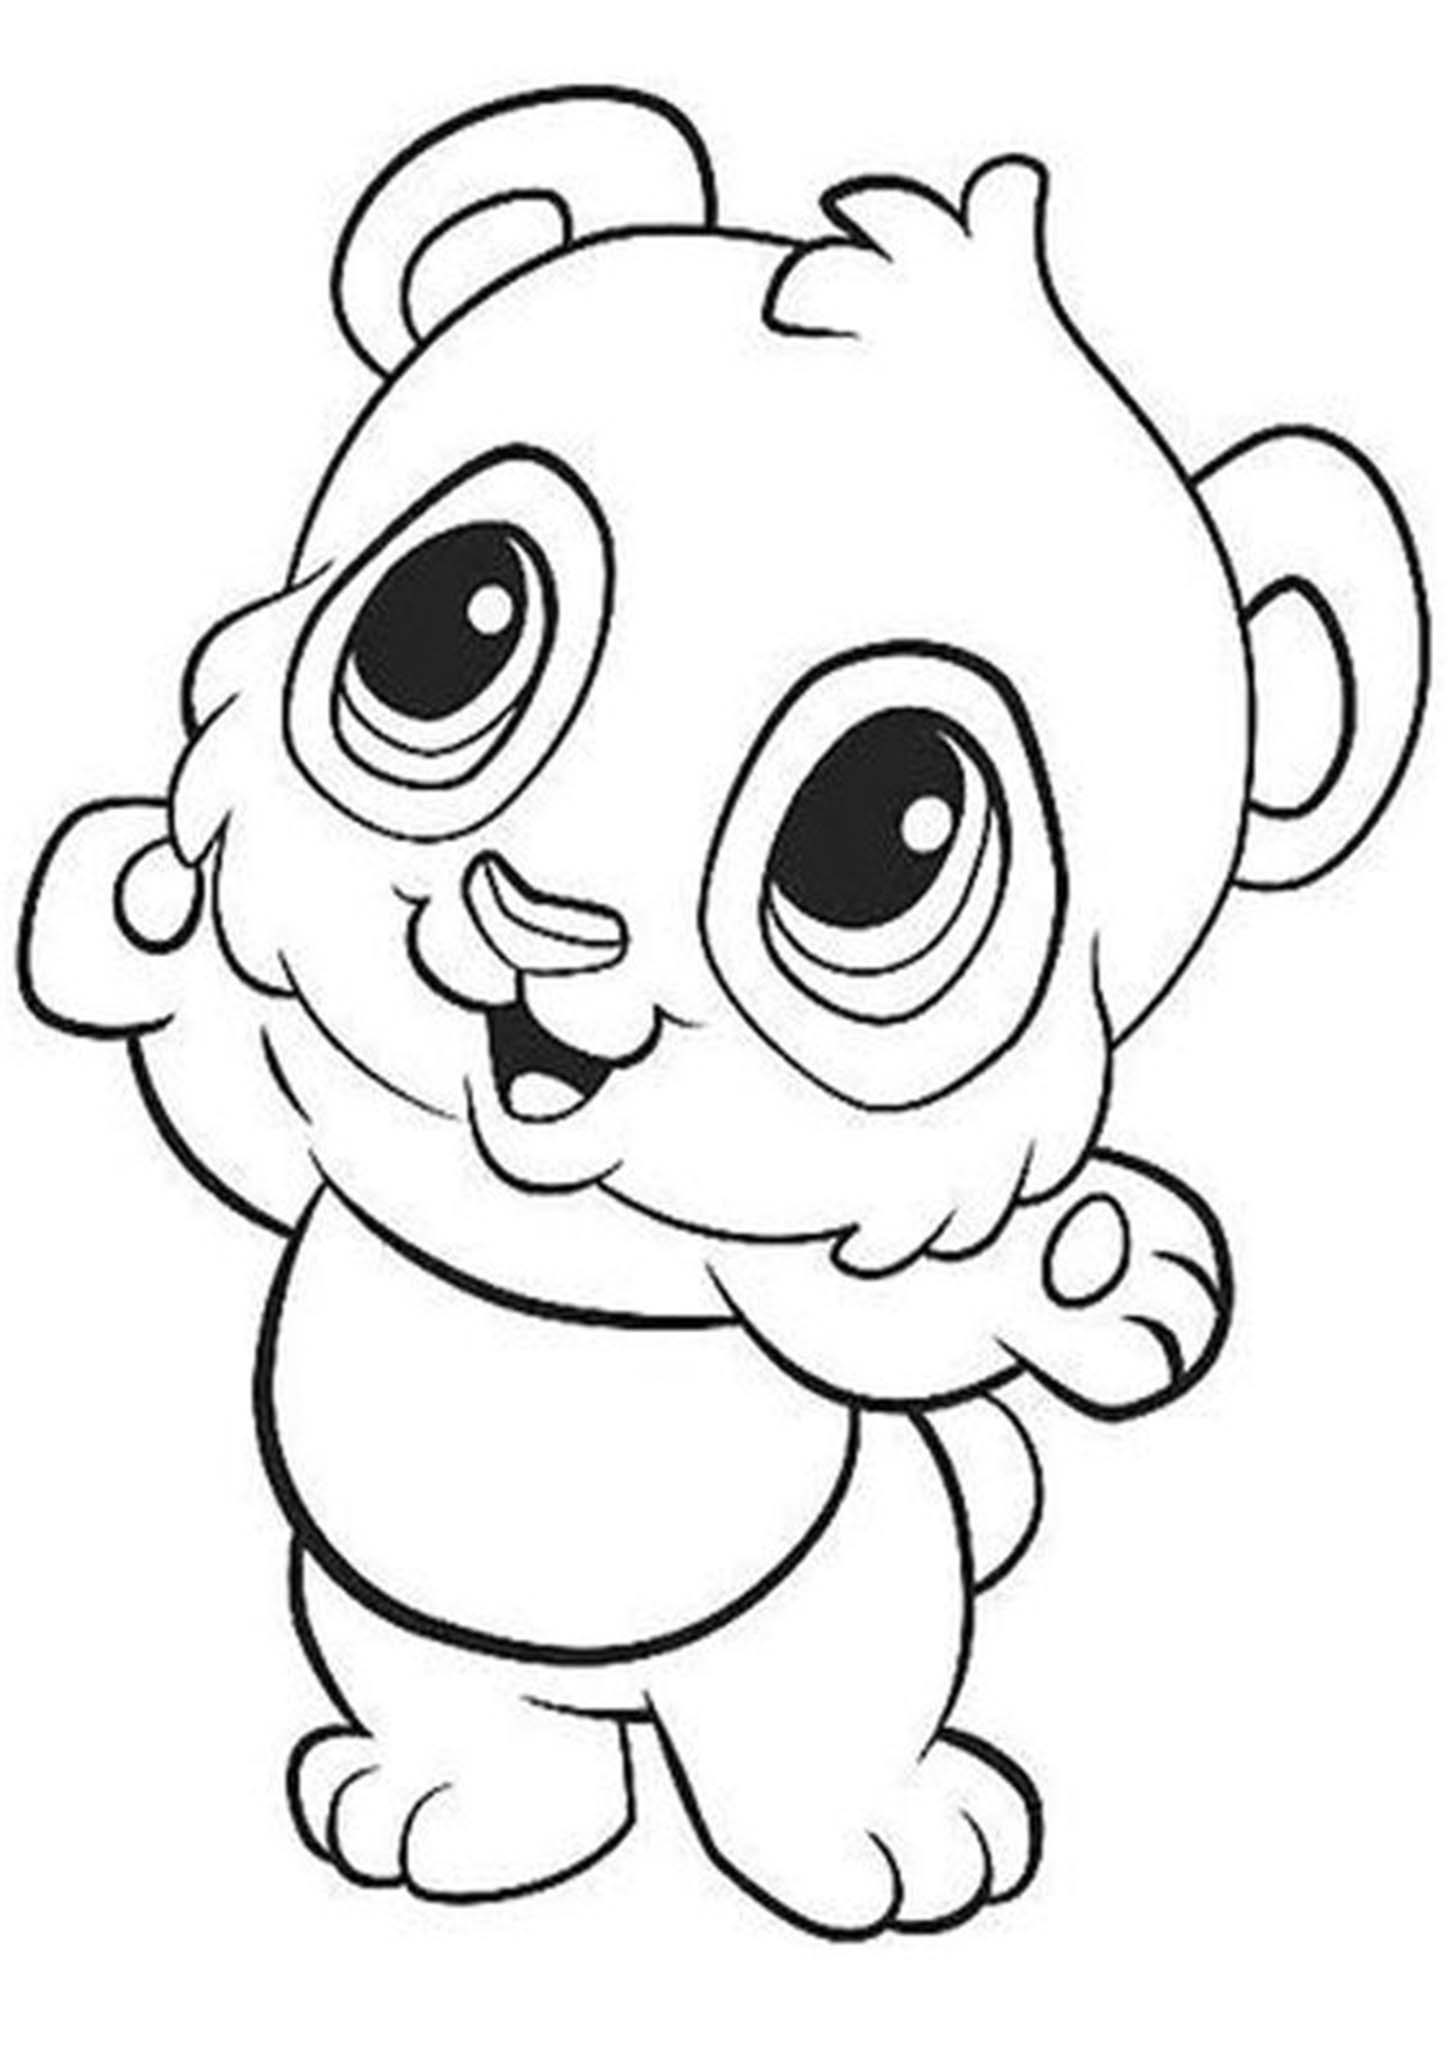 Free easy to print panda coloring pages